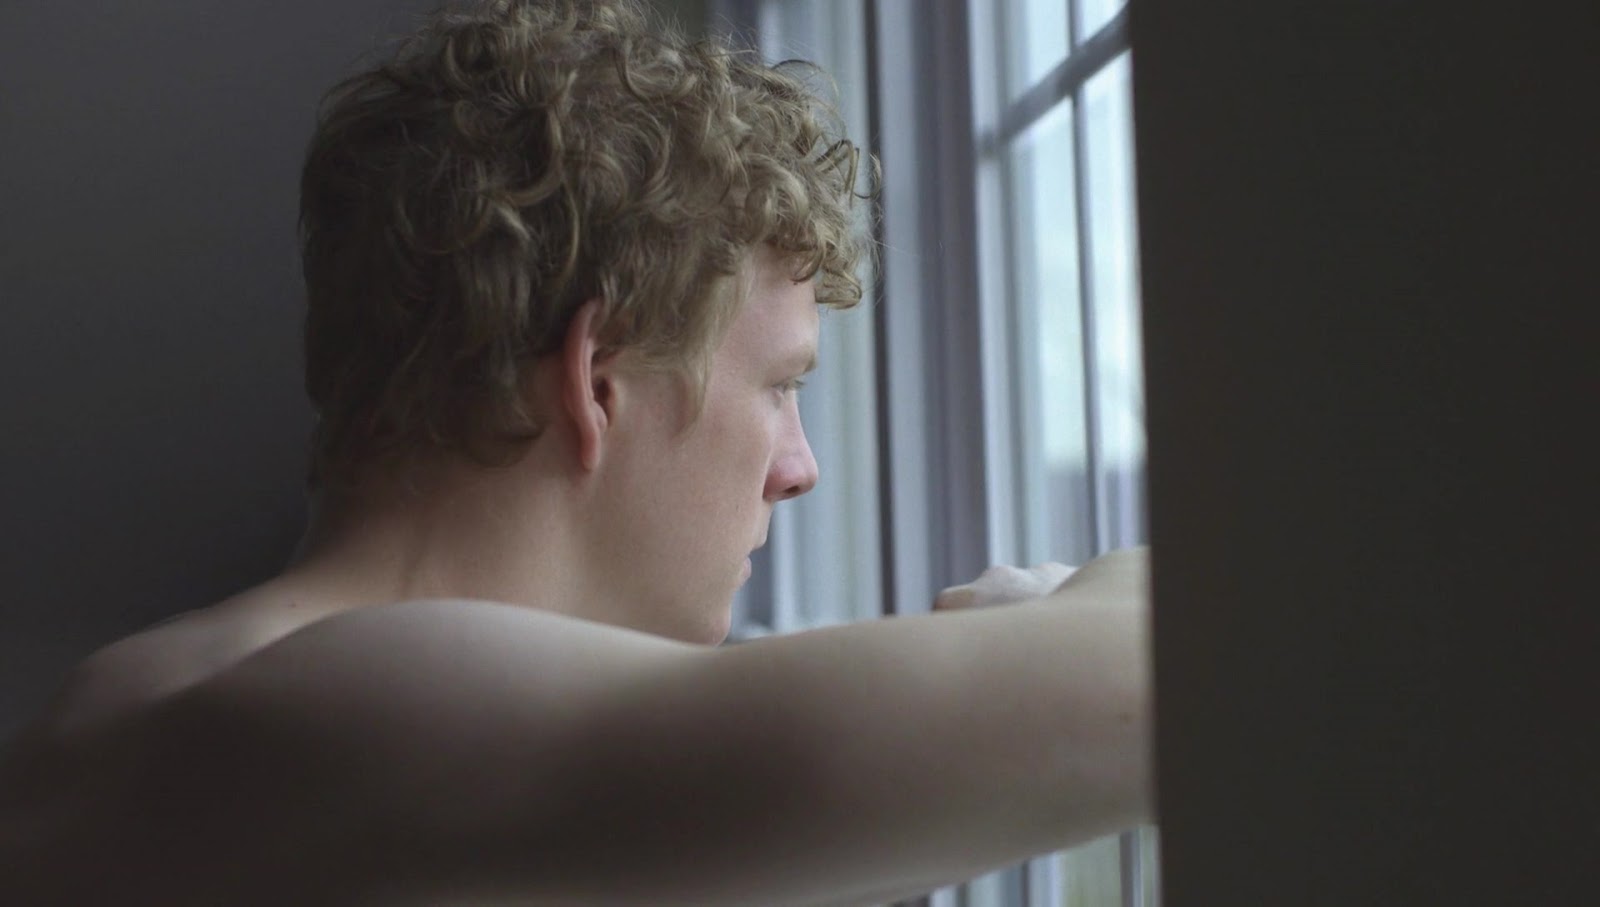 Patrick Gibson nude in The OA 1-01 "Homecoming" .